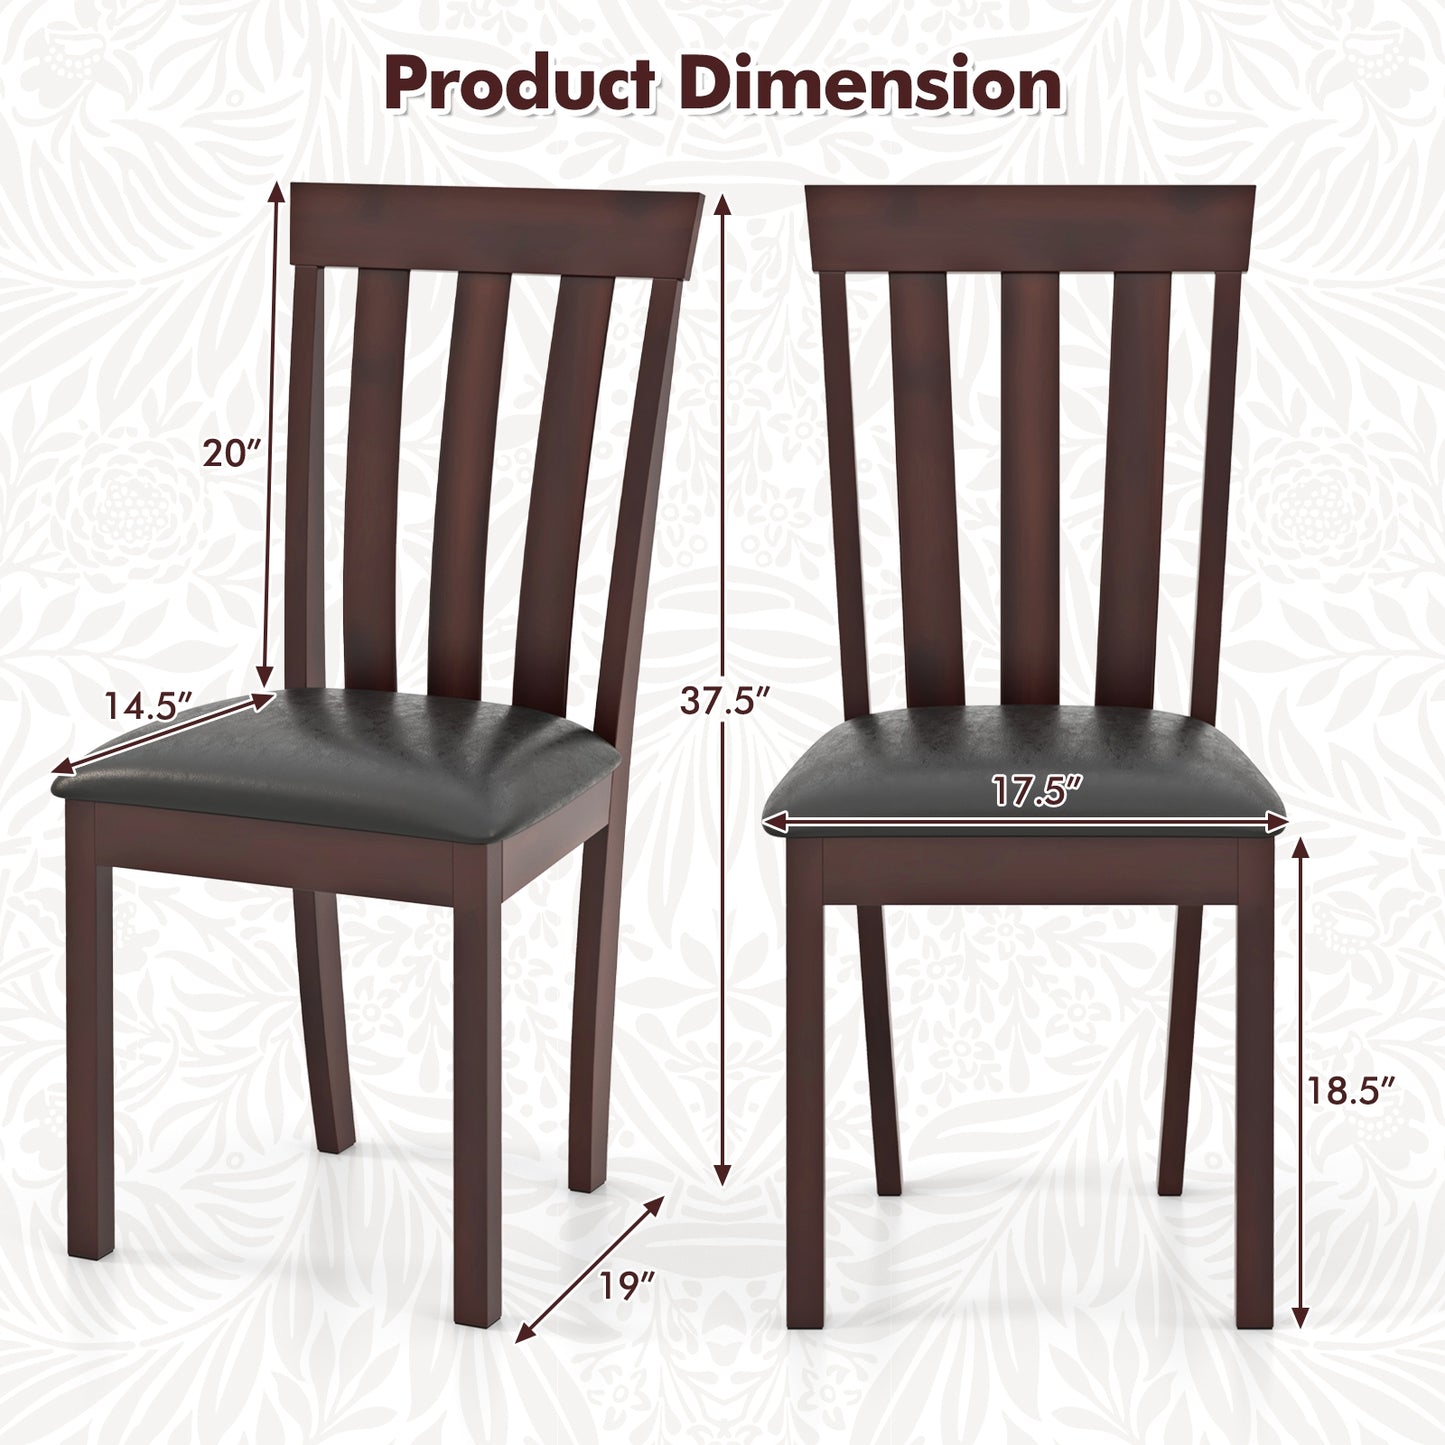 Dining Chair Set of 2 Upholstered Wooden Kitchen Chairs with Padded Seat and Rubber Wood Frame-Espresso